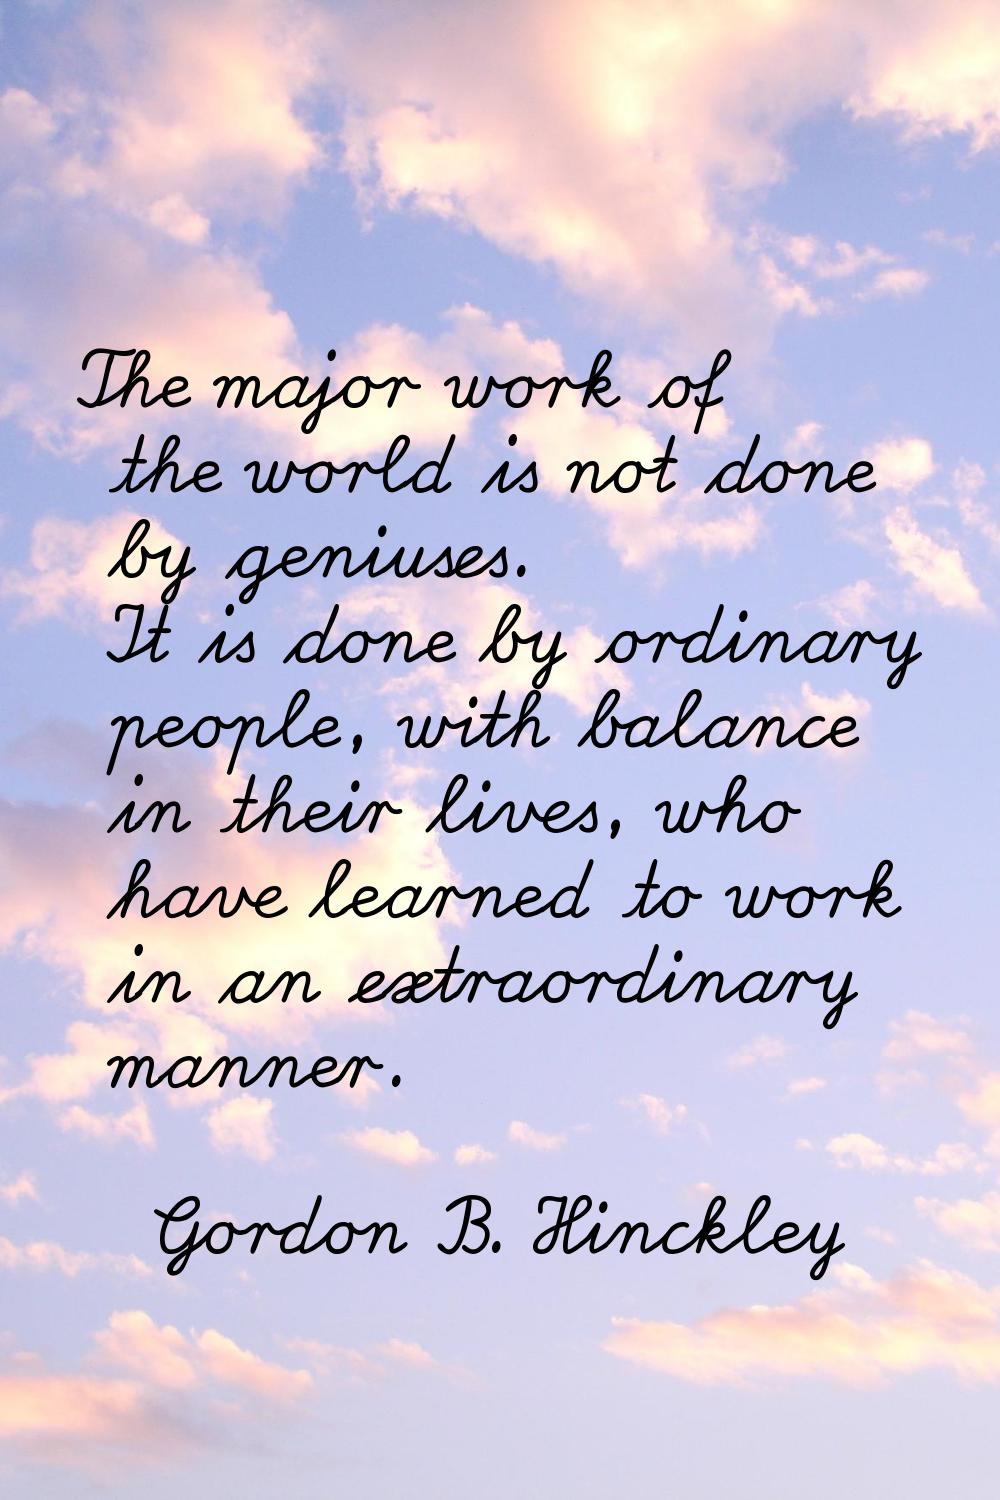 The major work of the world is not done by geniuses. It is done by ordinary people, with balance in